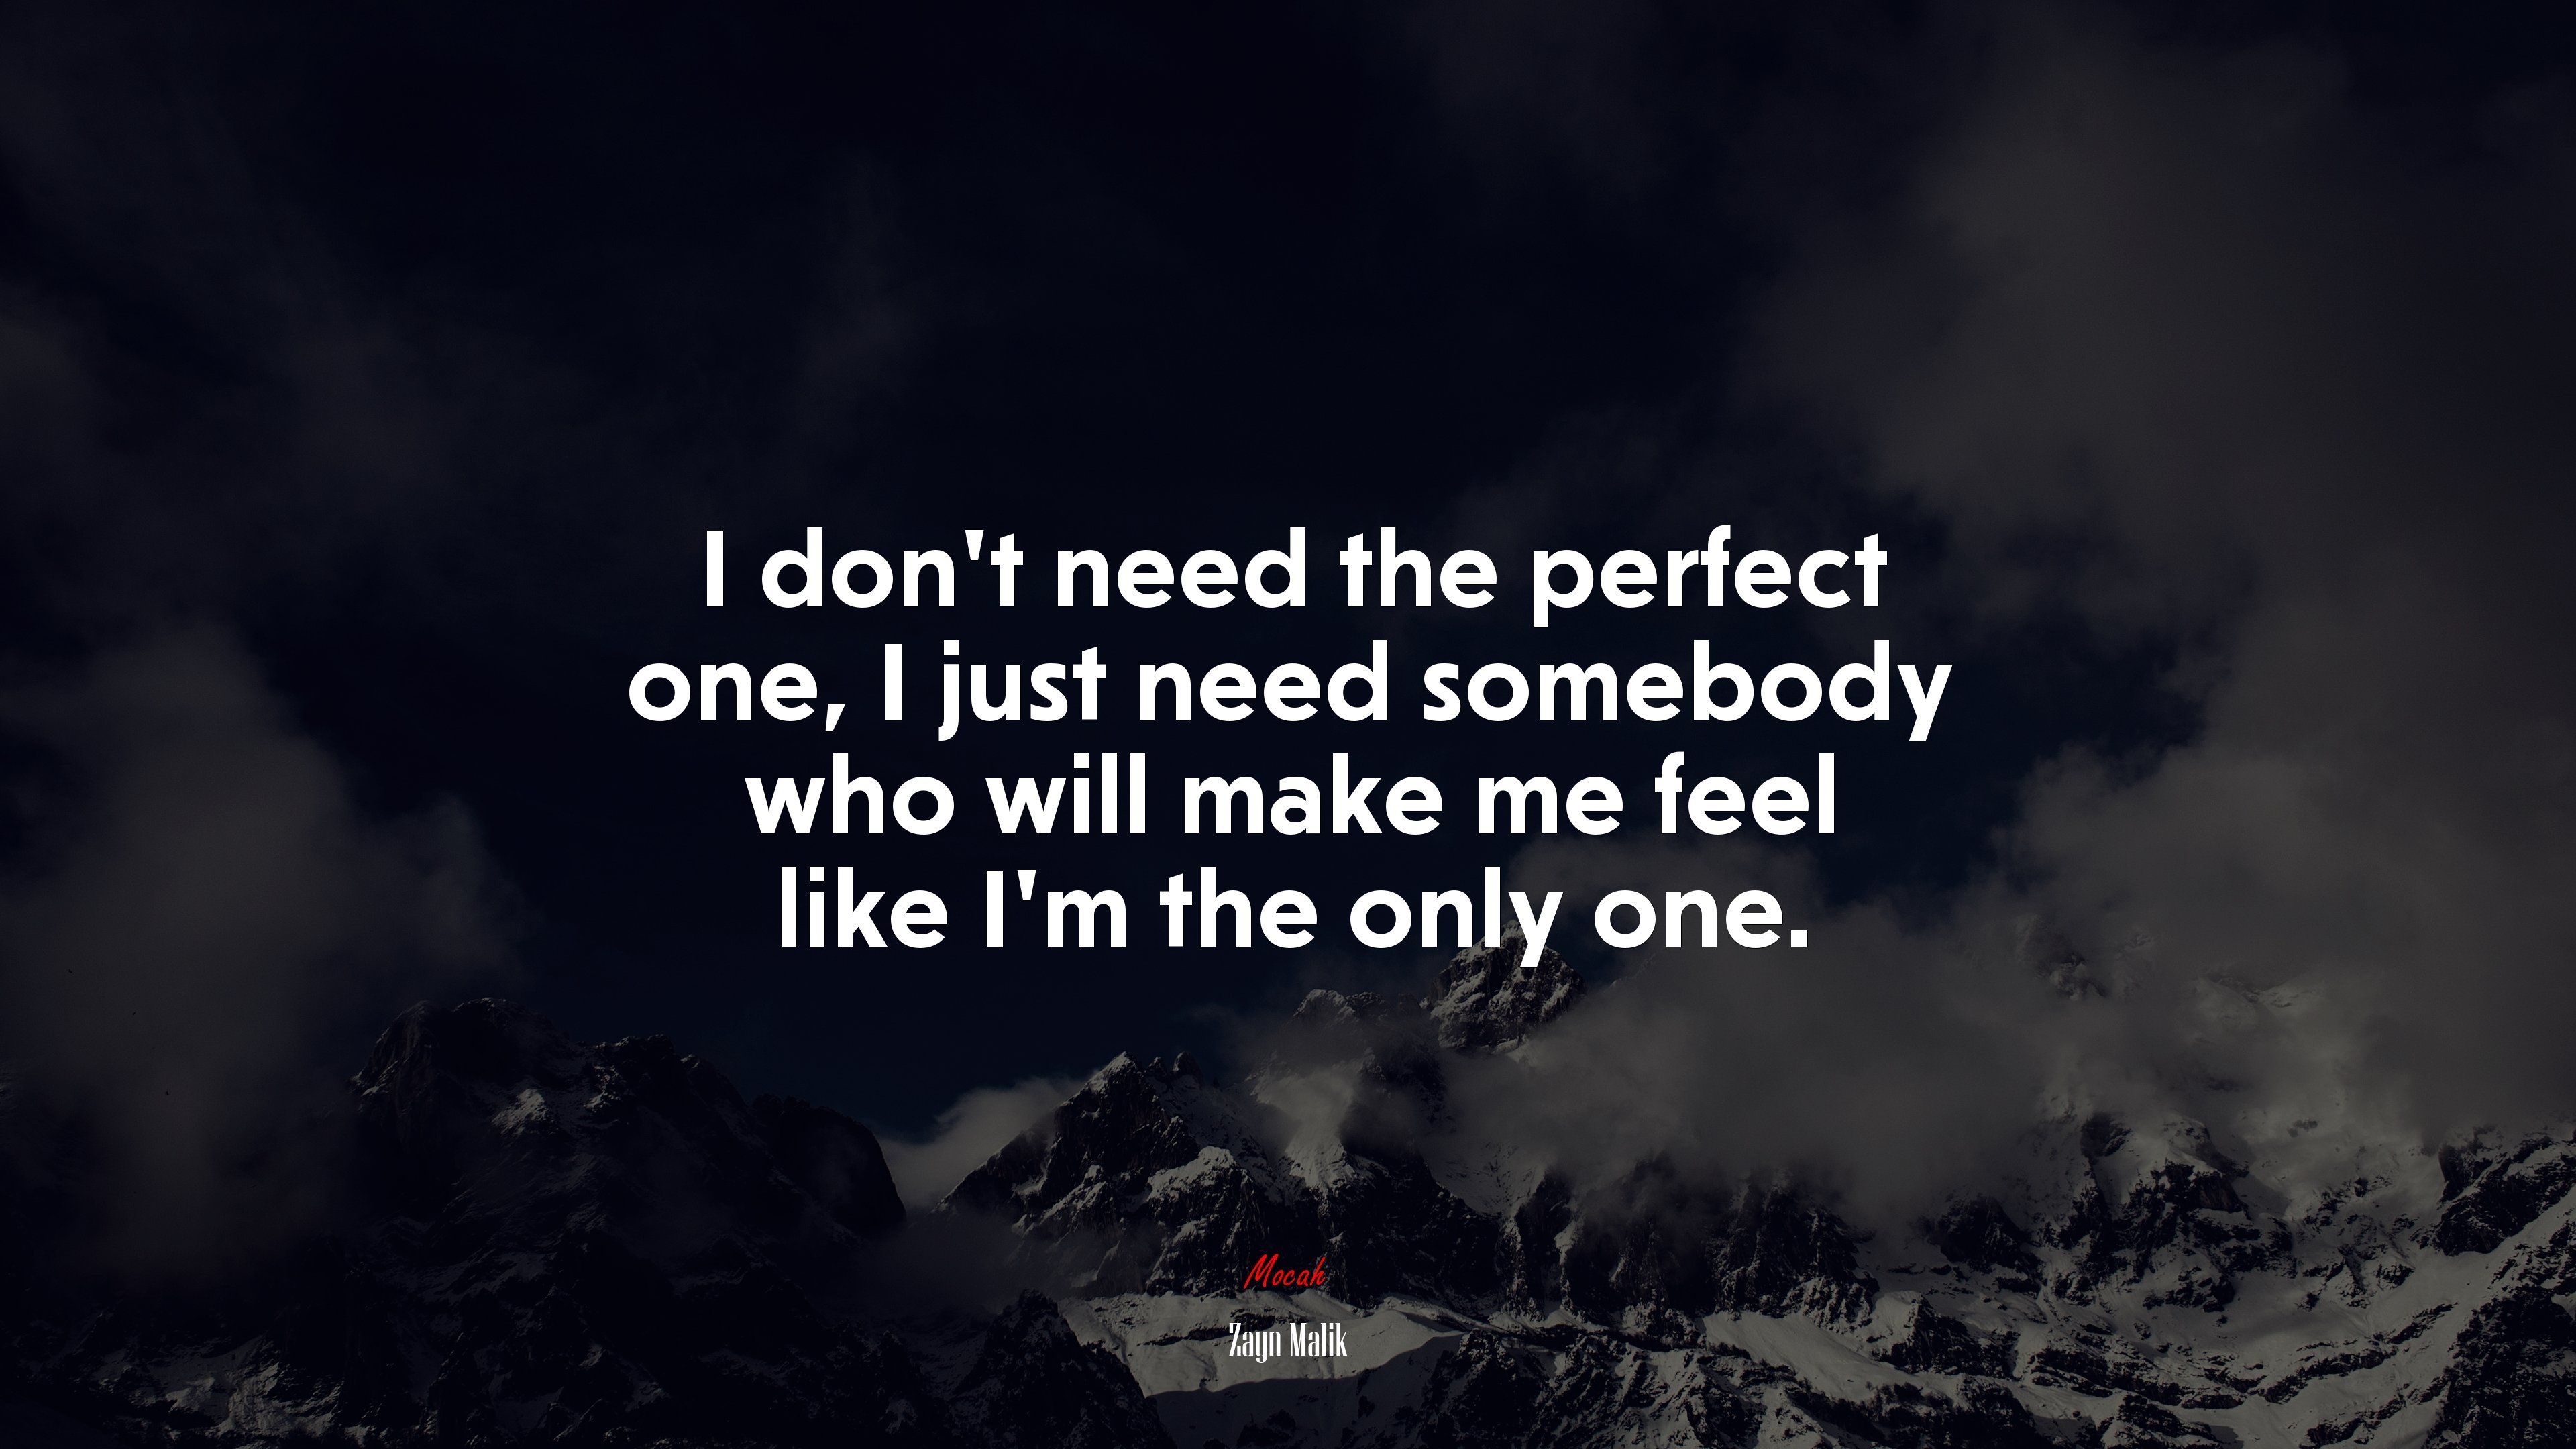 I don't need the perfect one, I just need somebody who will make me feel like I'm the only one. Zayn Malik quote, 4k wallpaper